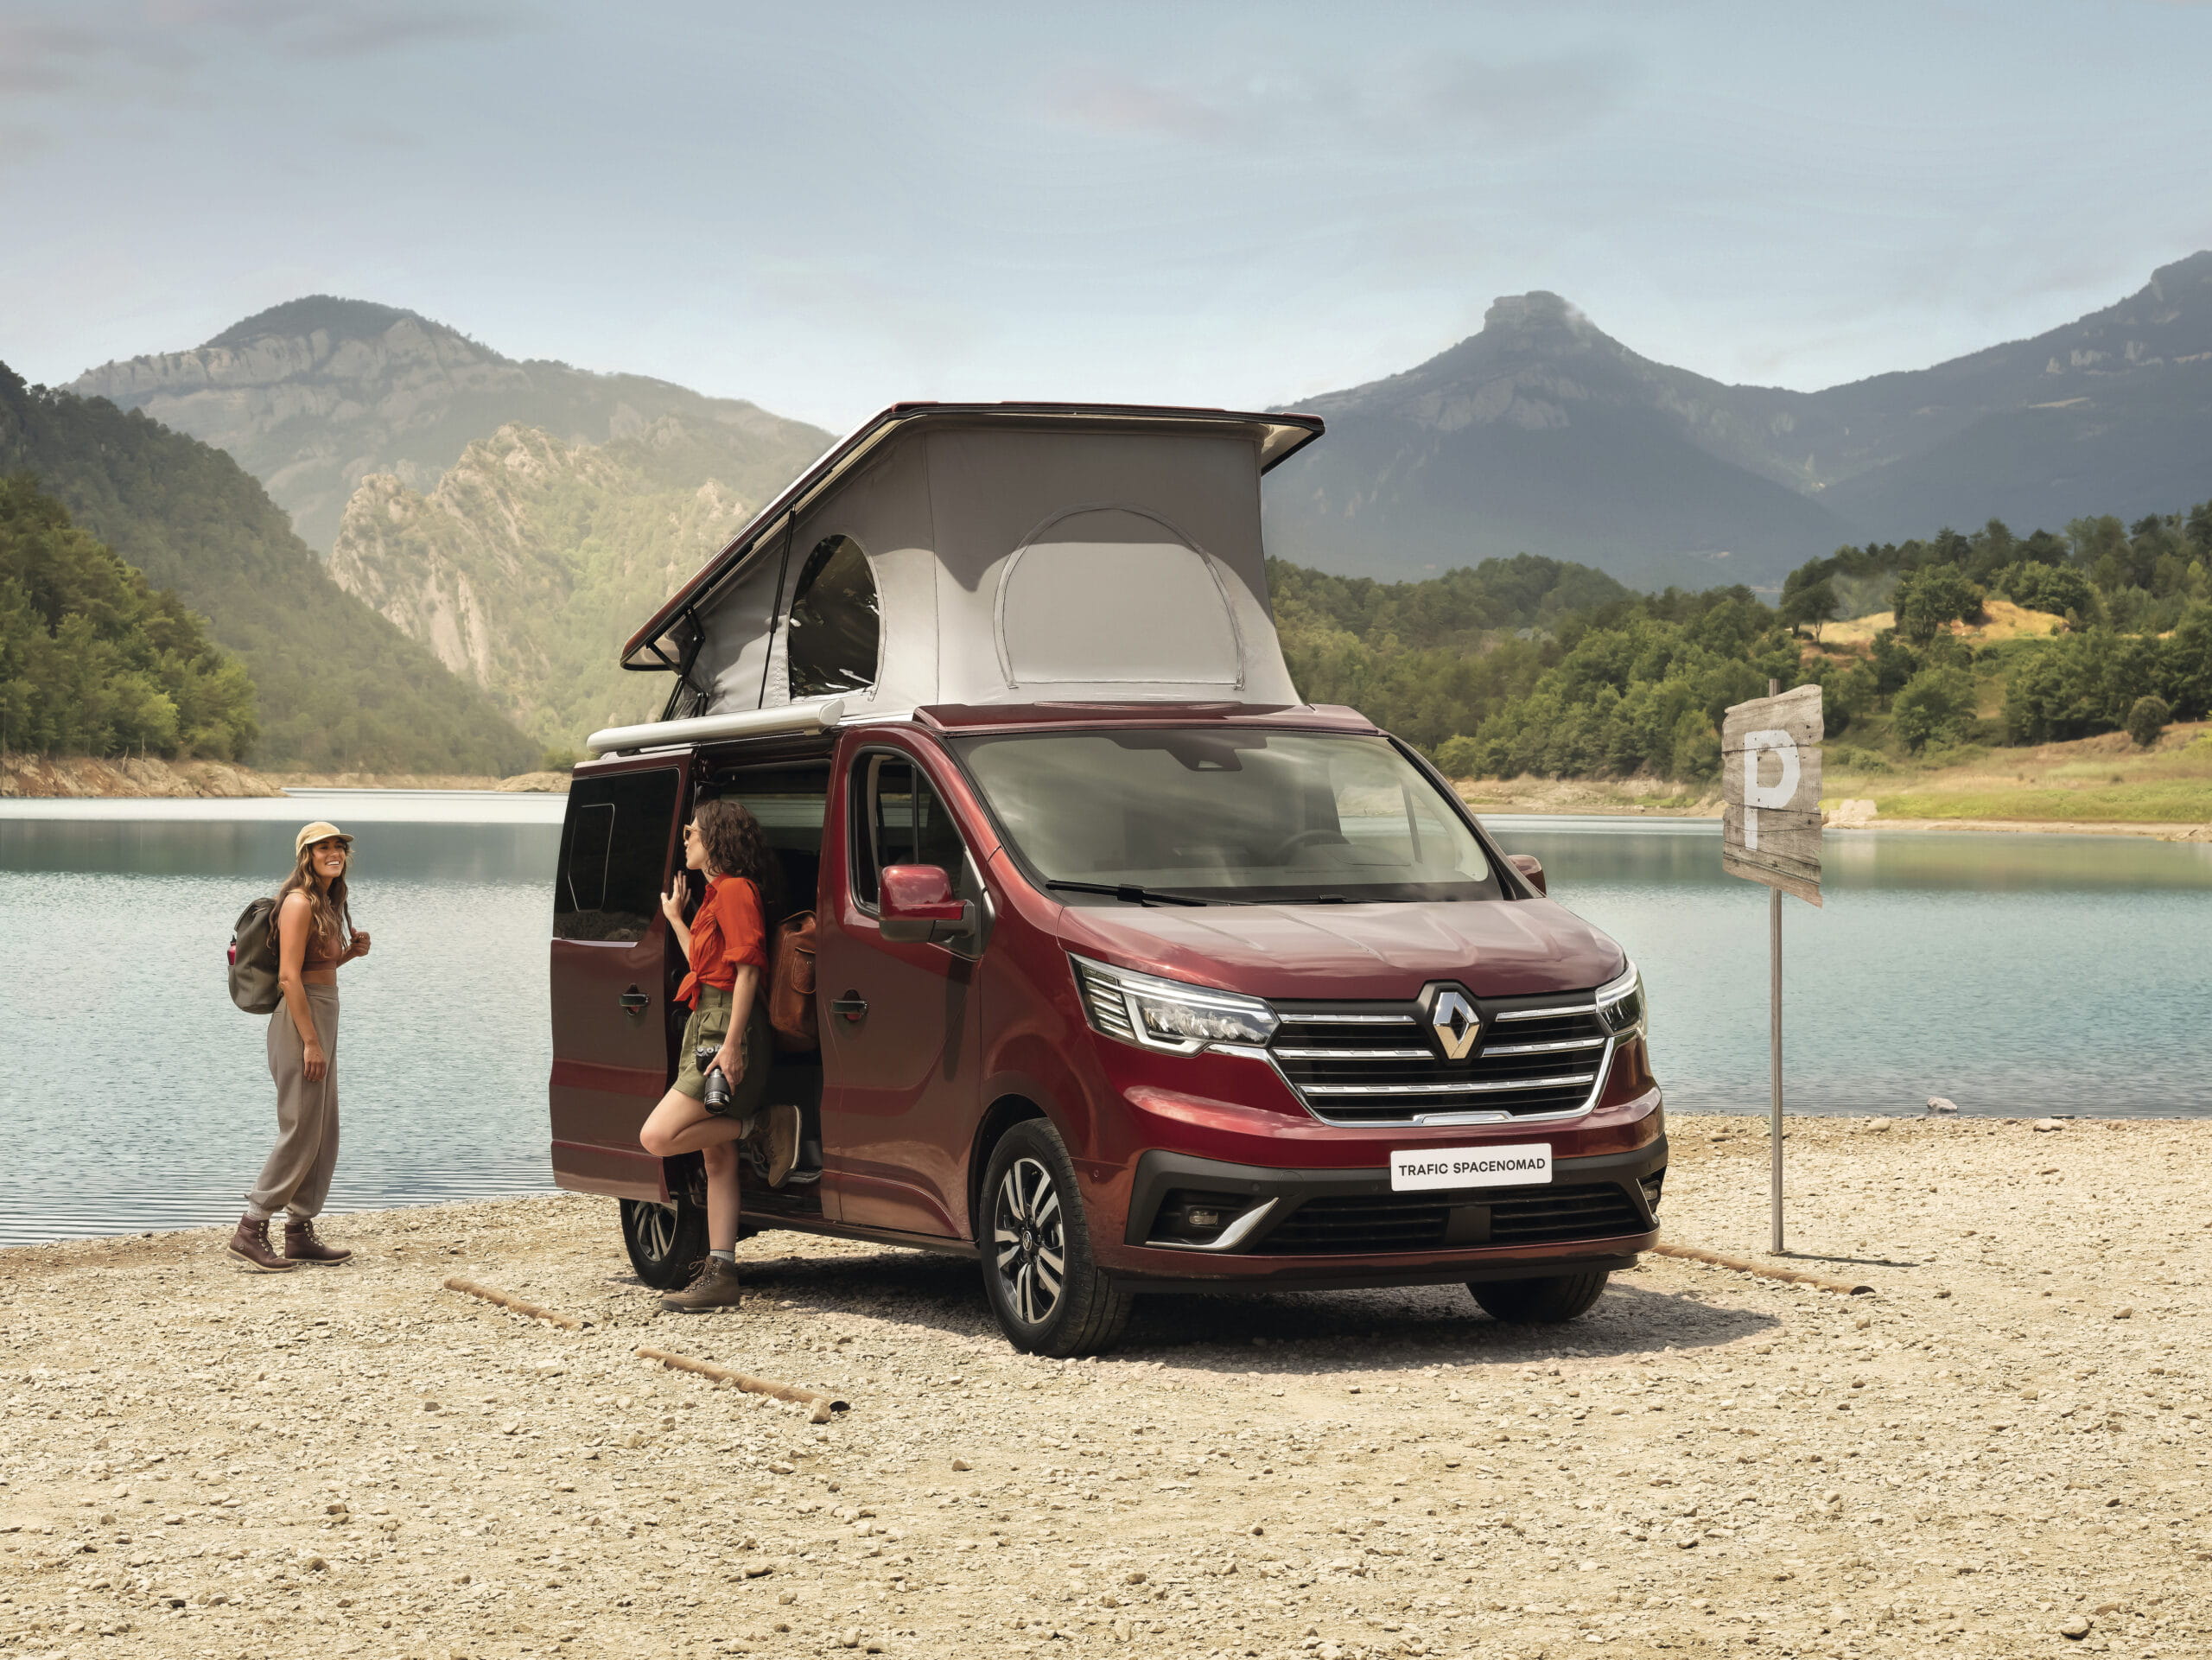 2021-New-Renault-Trafic-SpaceNomad-4-scaled